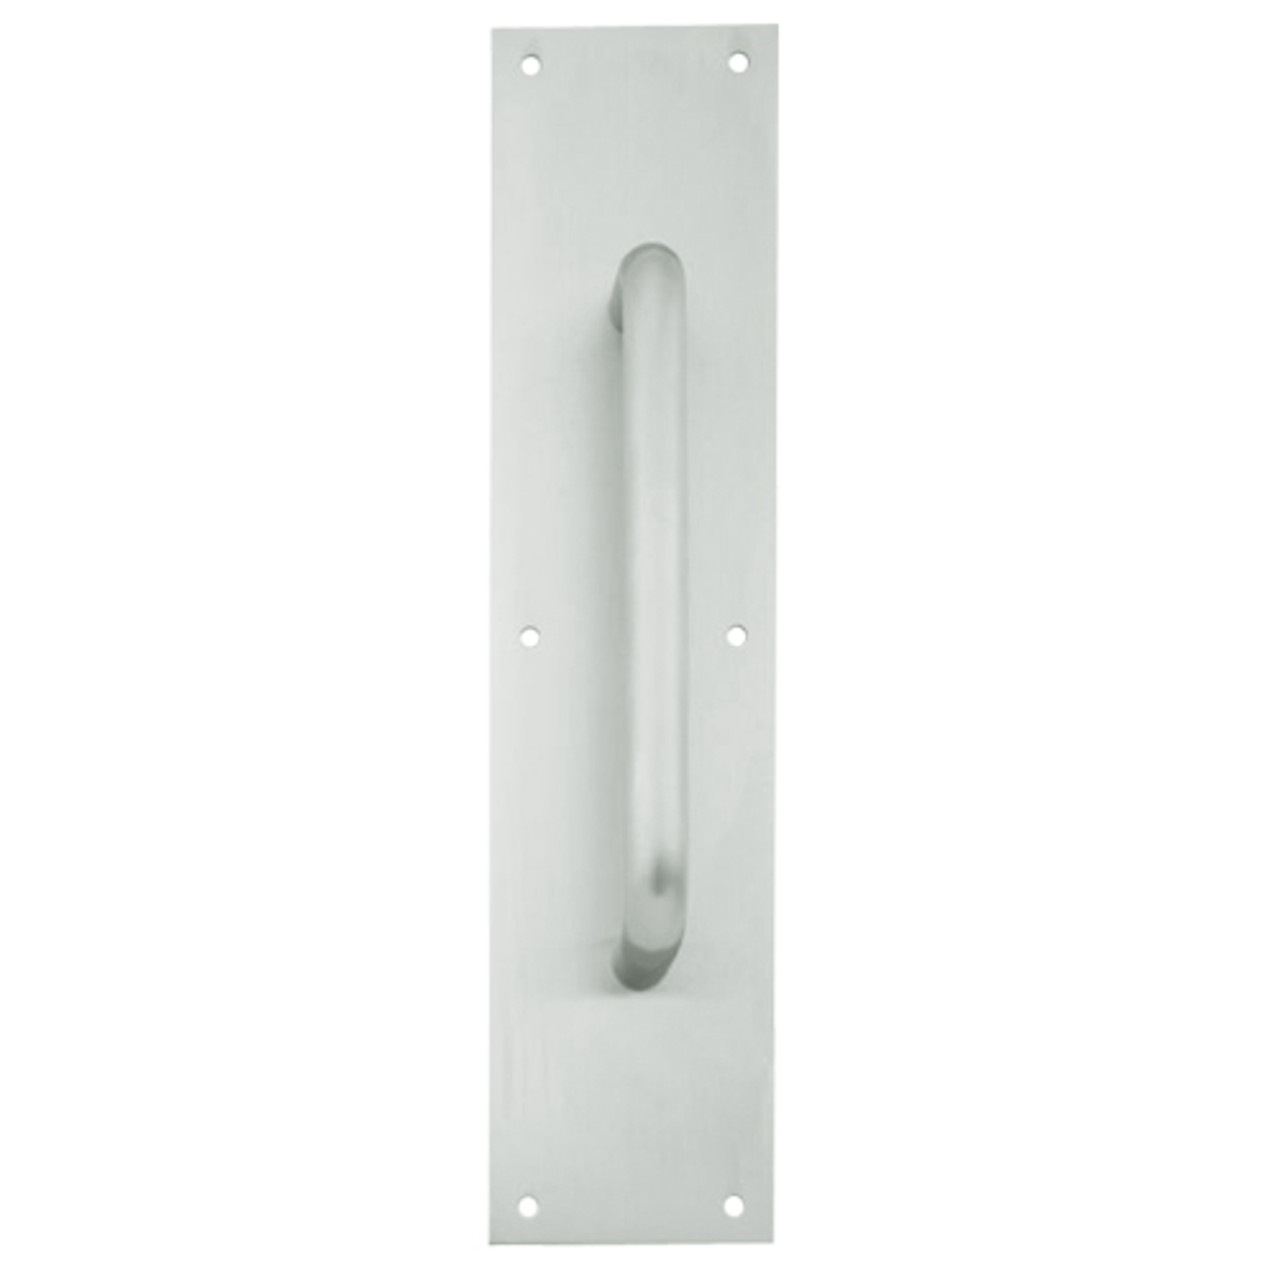 8302-10-US15-4x16 IVES Architectural Door Trim 4x16 Inch Pull Plate in Satin Nickel